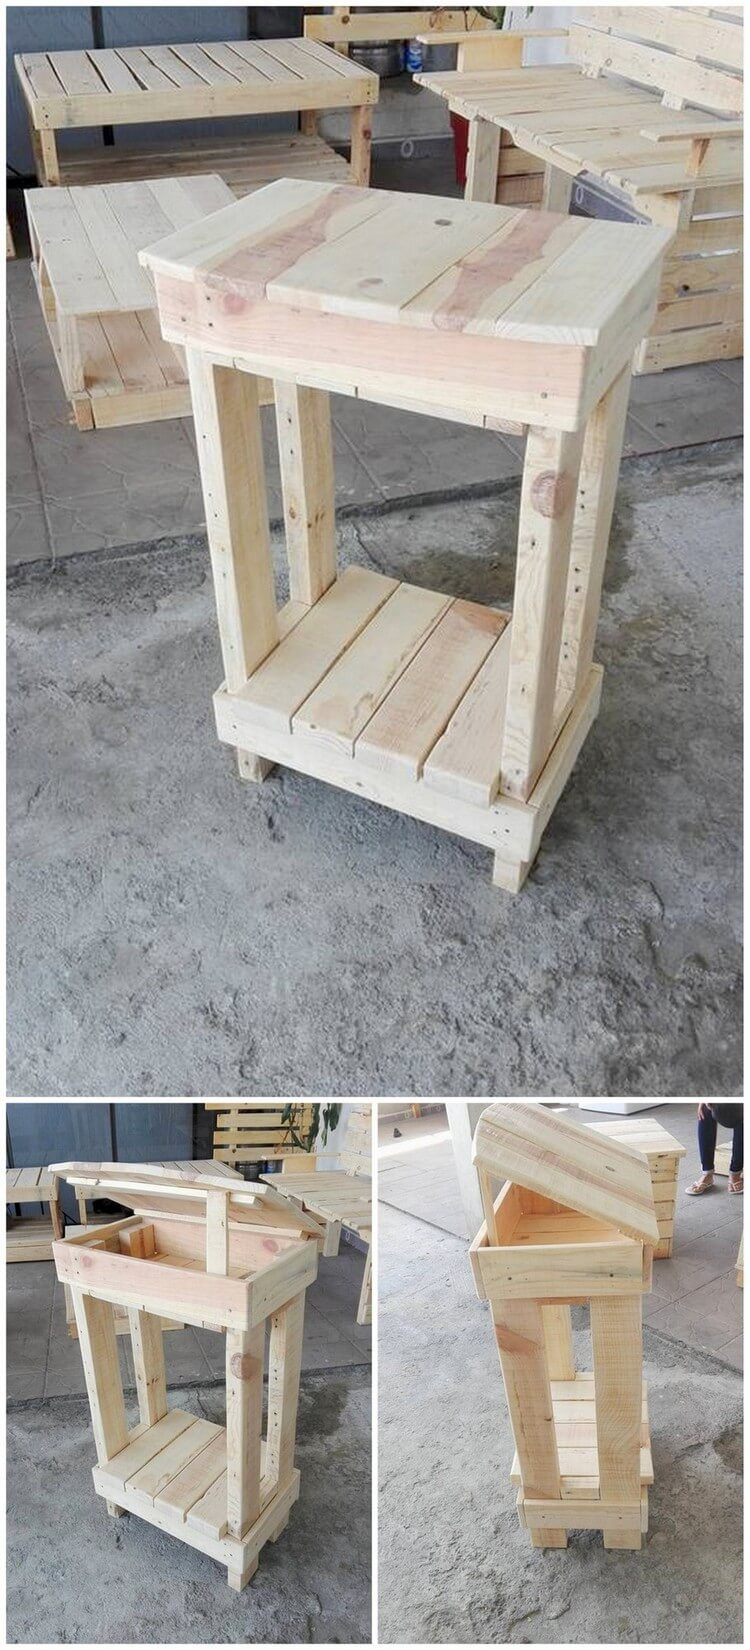 DIY With Wood Pallets
 Feasible DIY Projects Using Shipping Wooden Pallets